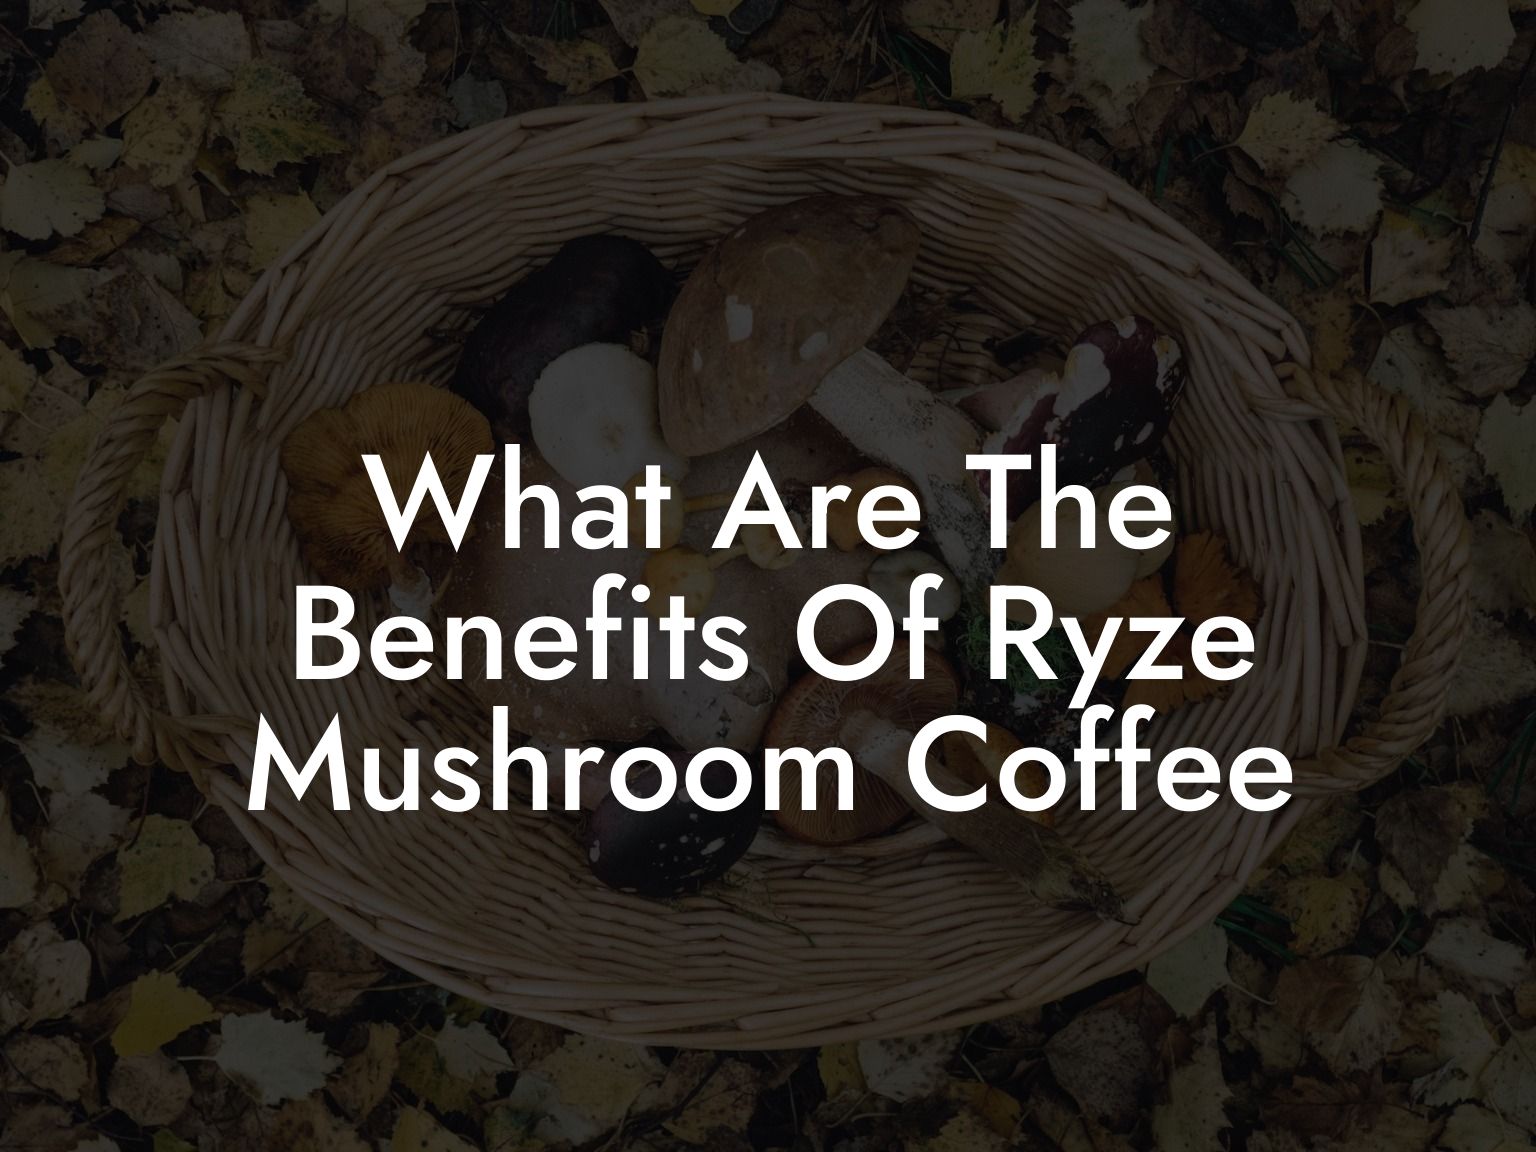 What Are The Benefits Of Ryze Mushroom Coffee